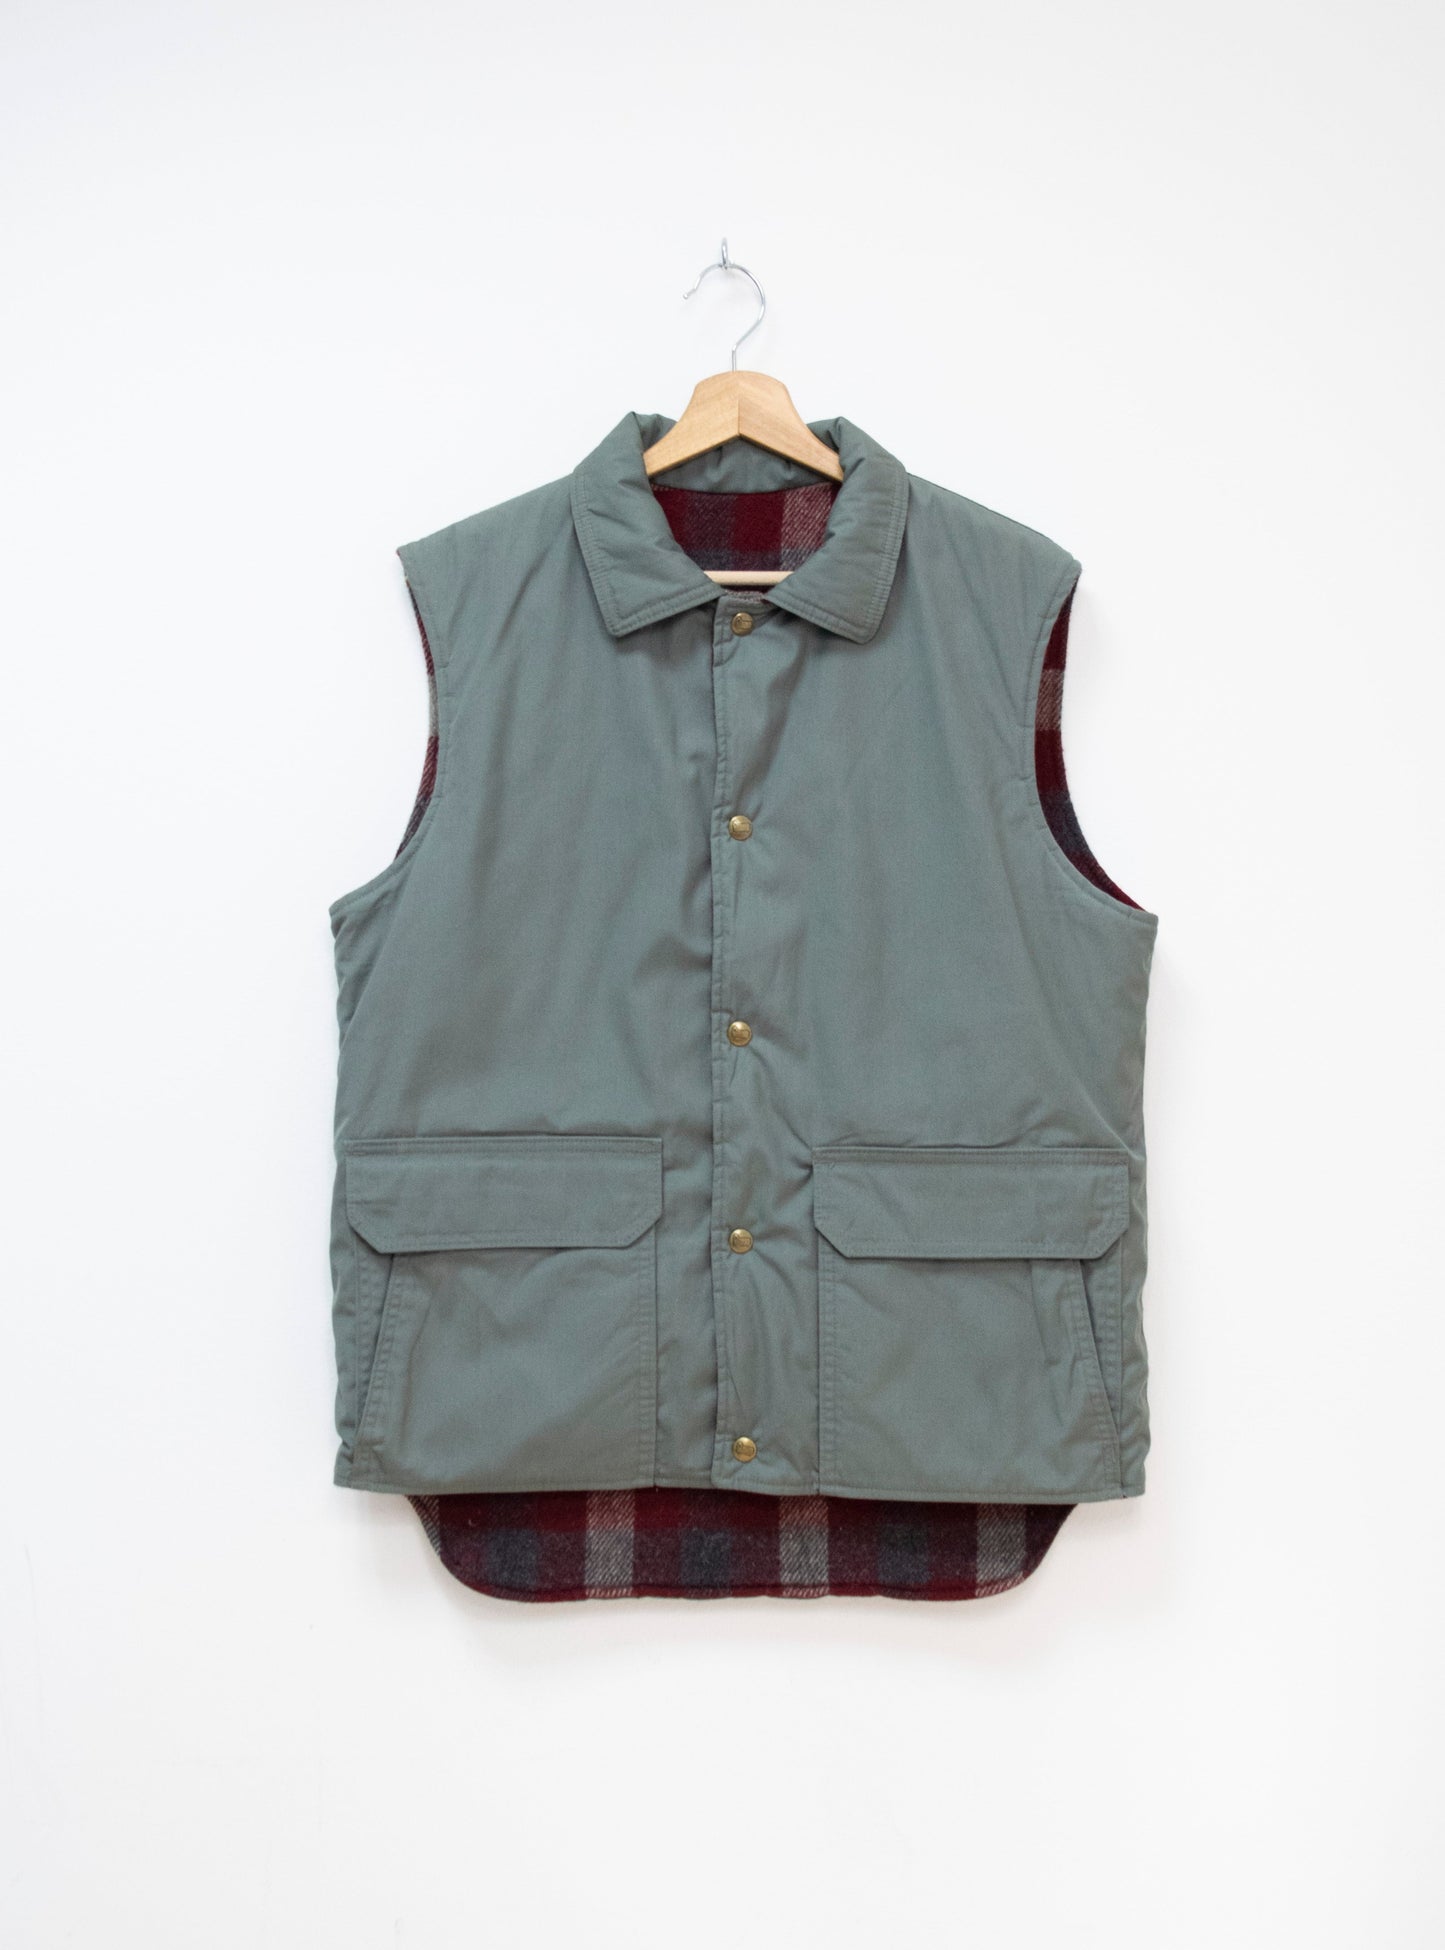 Vintage Made in USA Woolrich Reversible Vest - M